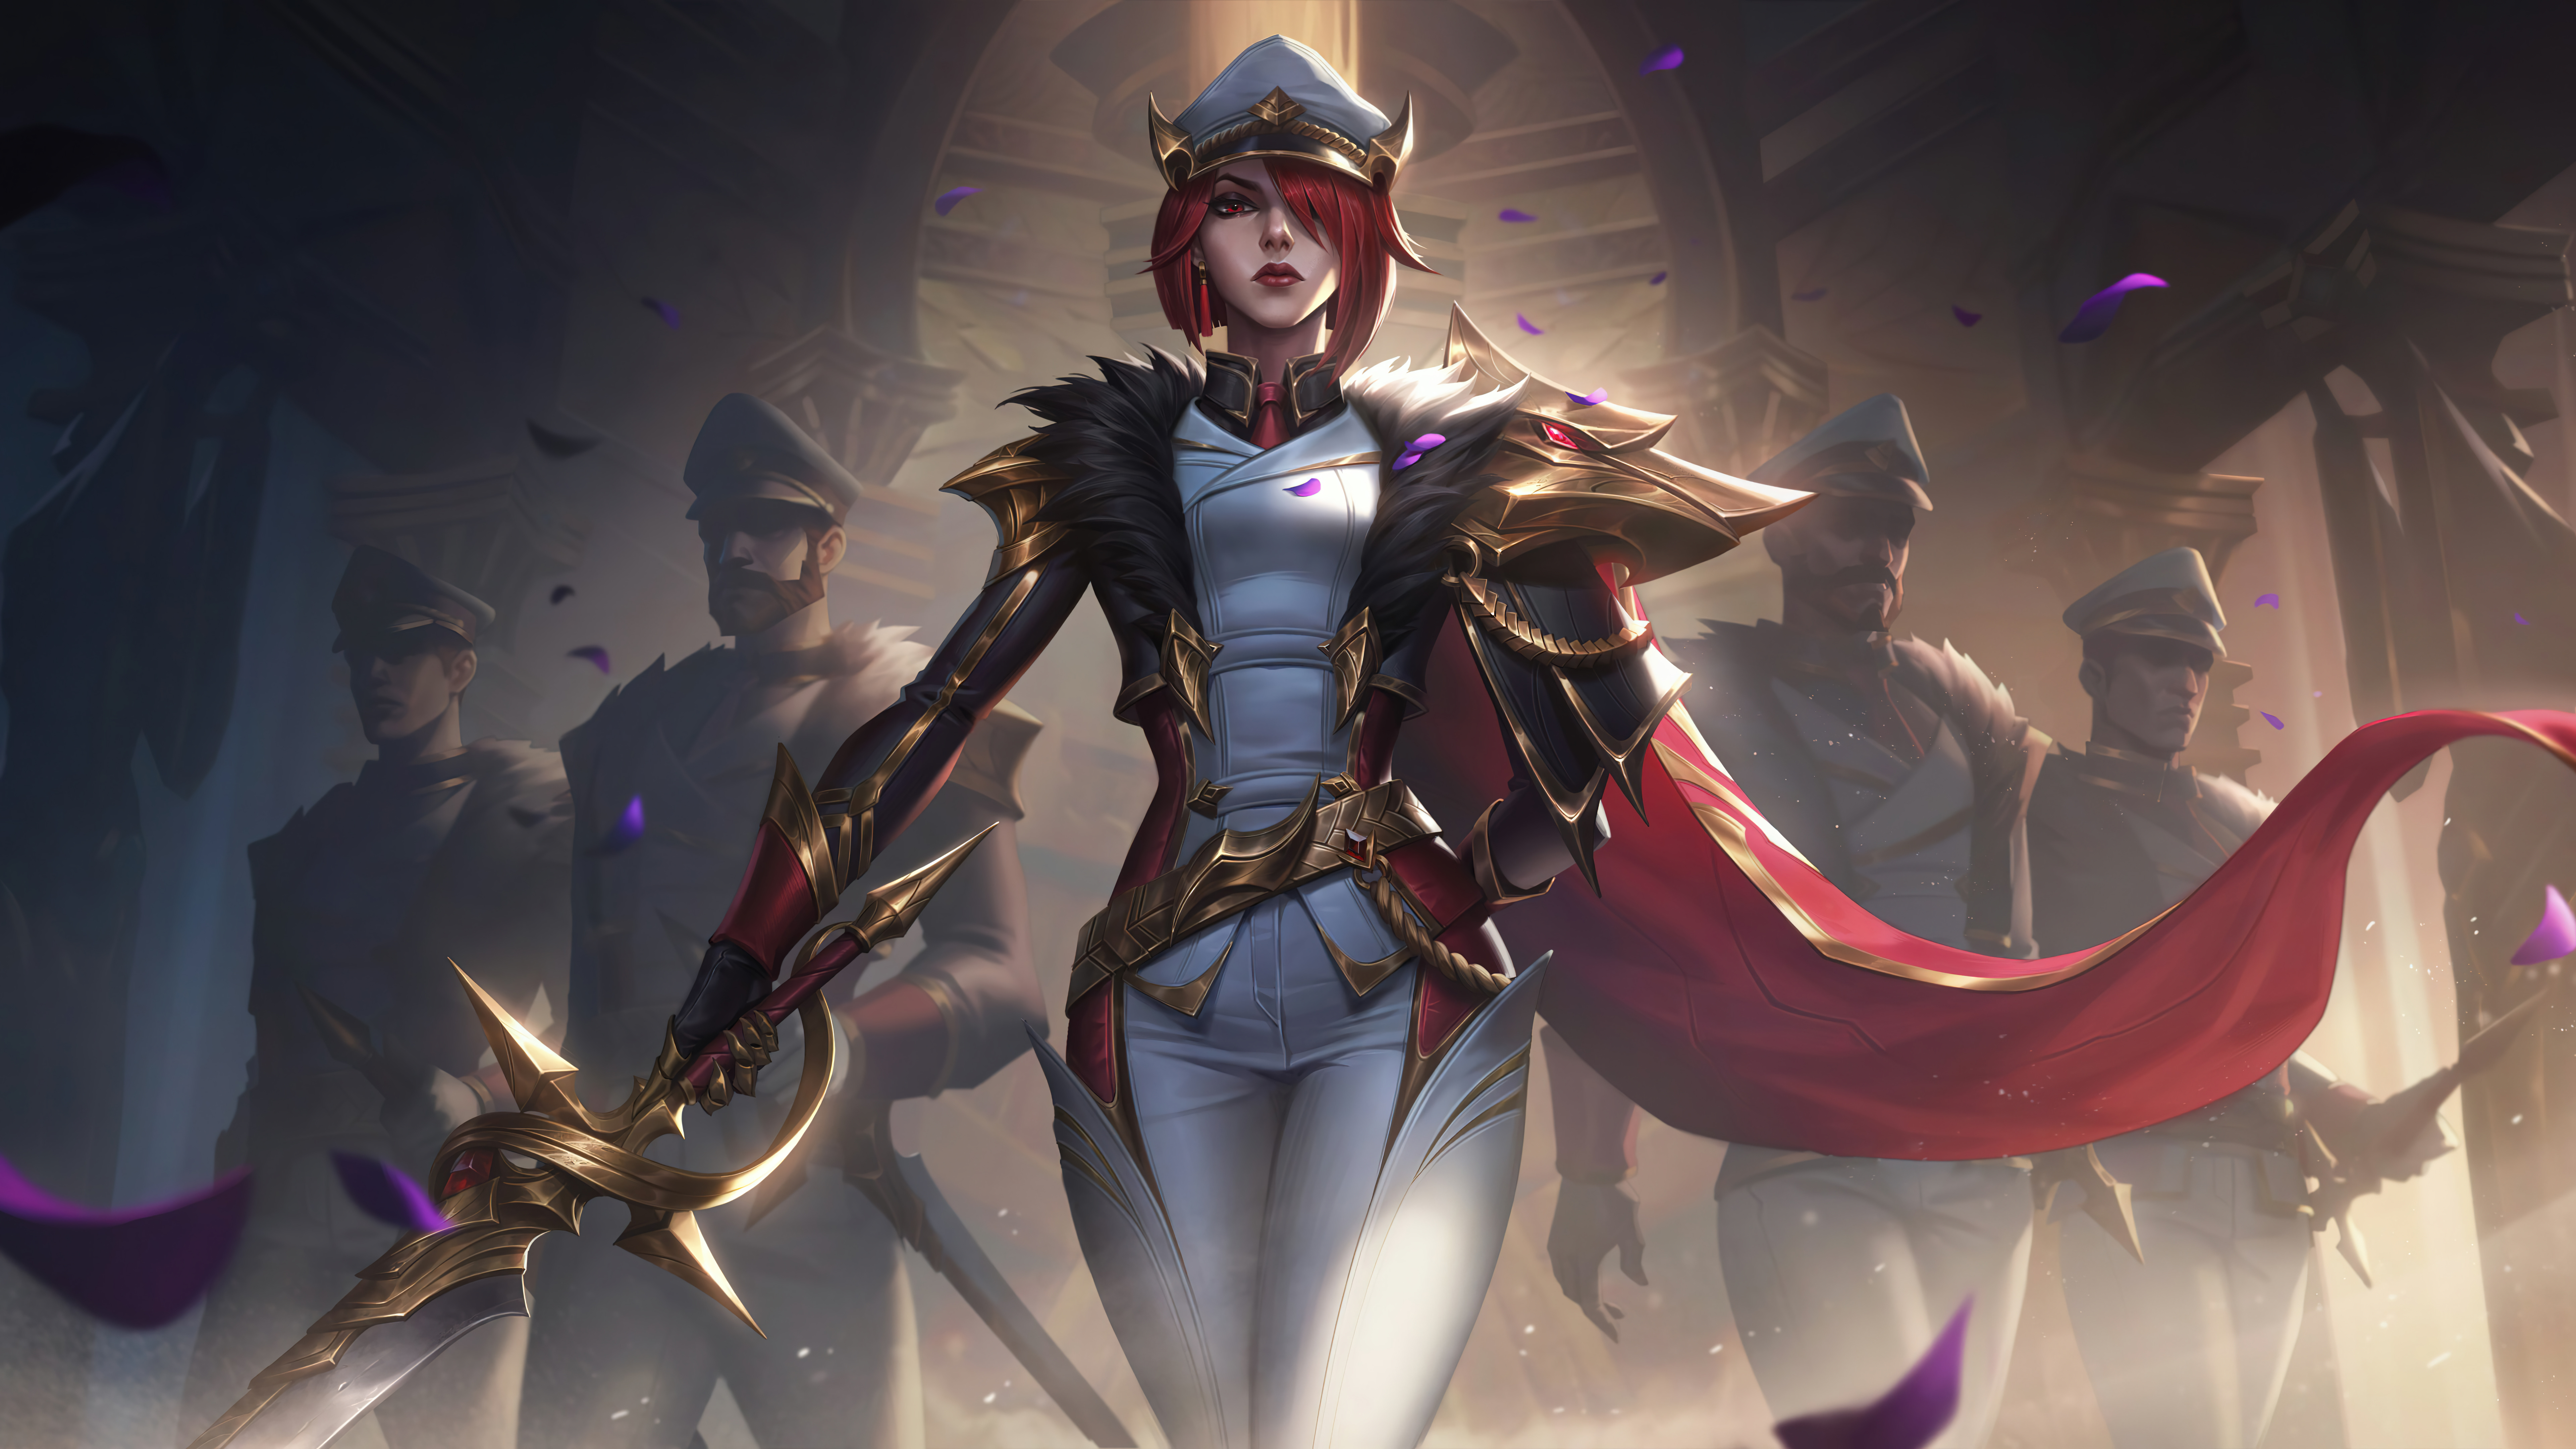 General 7680x4320 Glorious (League of Legends: Wild Rift) Fiora (League of Legends) League of Legends: Wild Rift League of Legends digital art Riot Games GZG 4K video games video game characters women